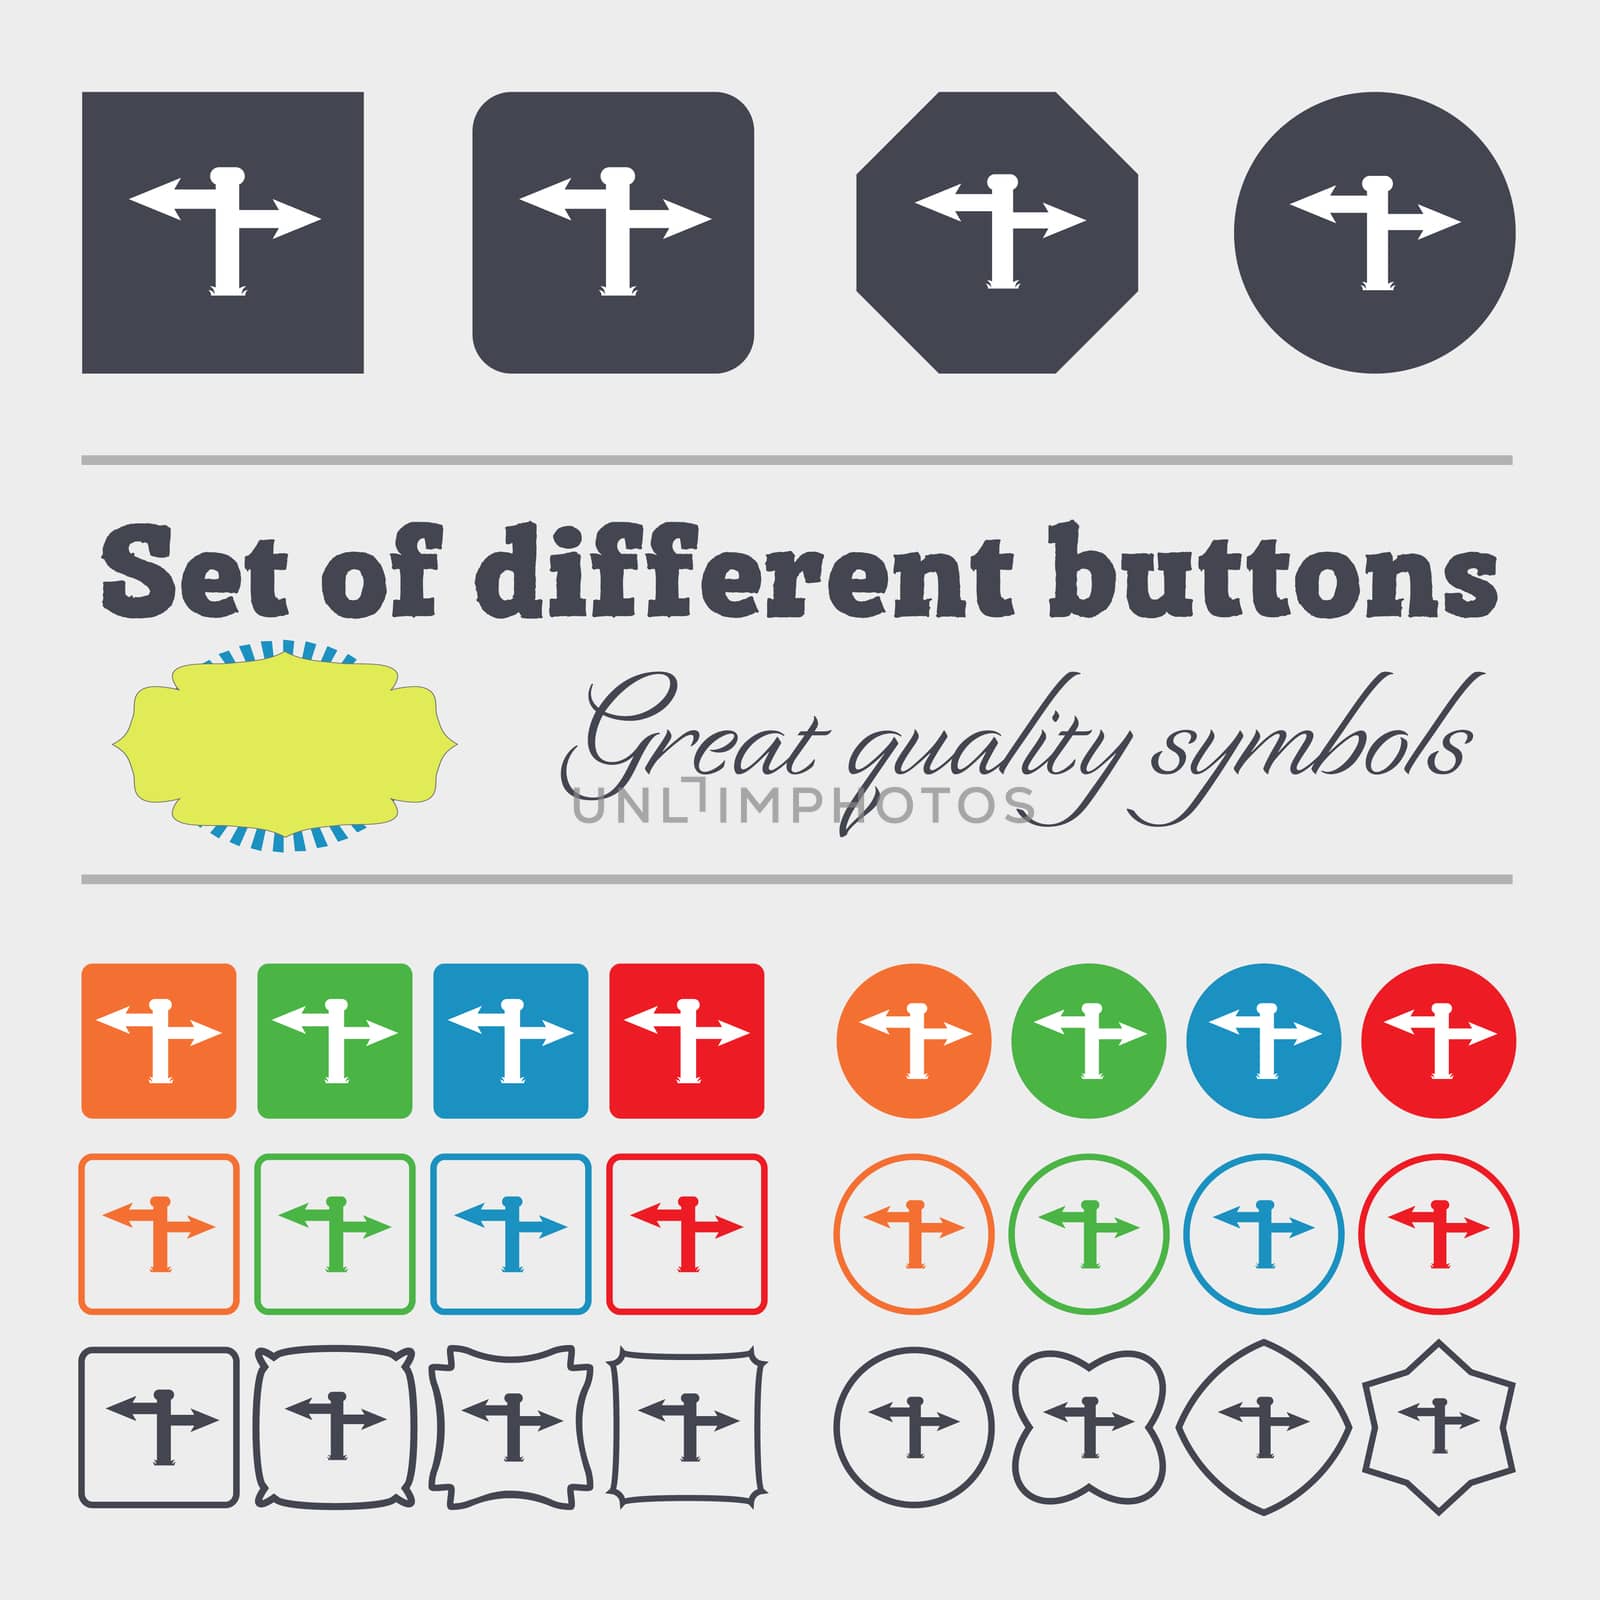 Blank Road Sign icon sign. Big set of colorful, diverse, high-quality buttons. illustration